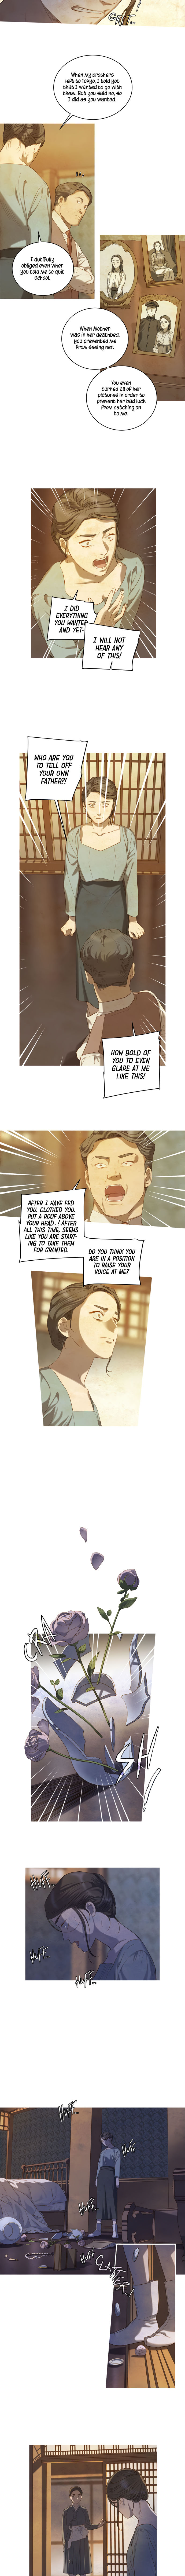 The Whale Star - The Gyeongseong Mermaid - Chapter 12 Page 6